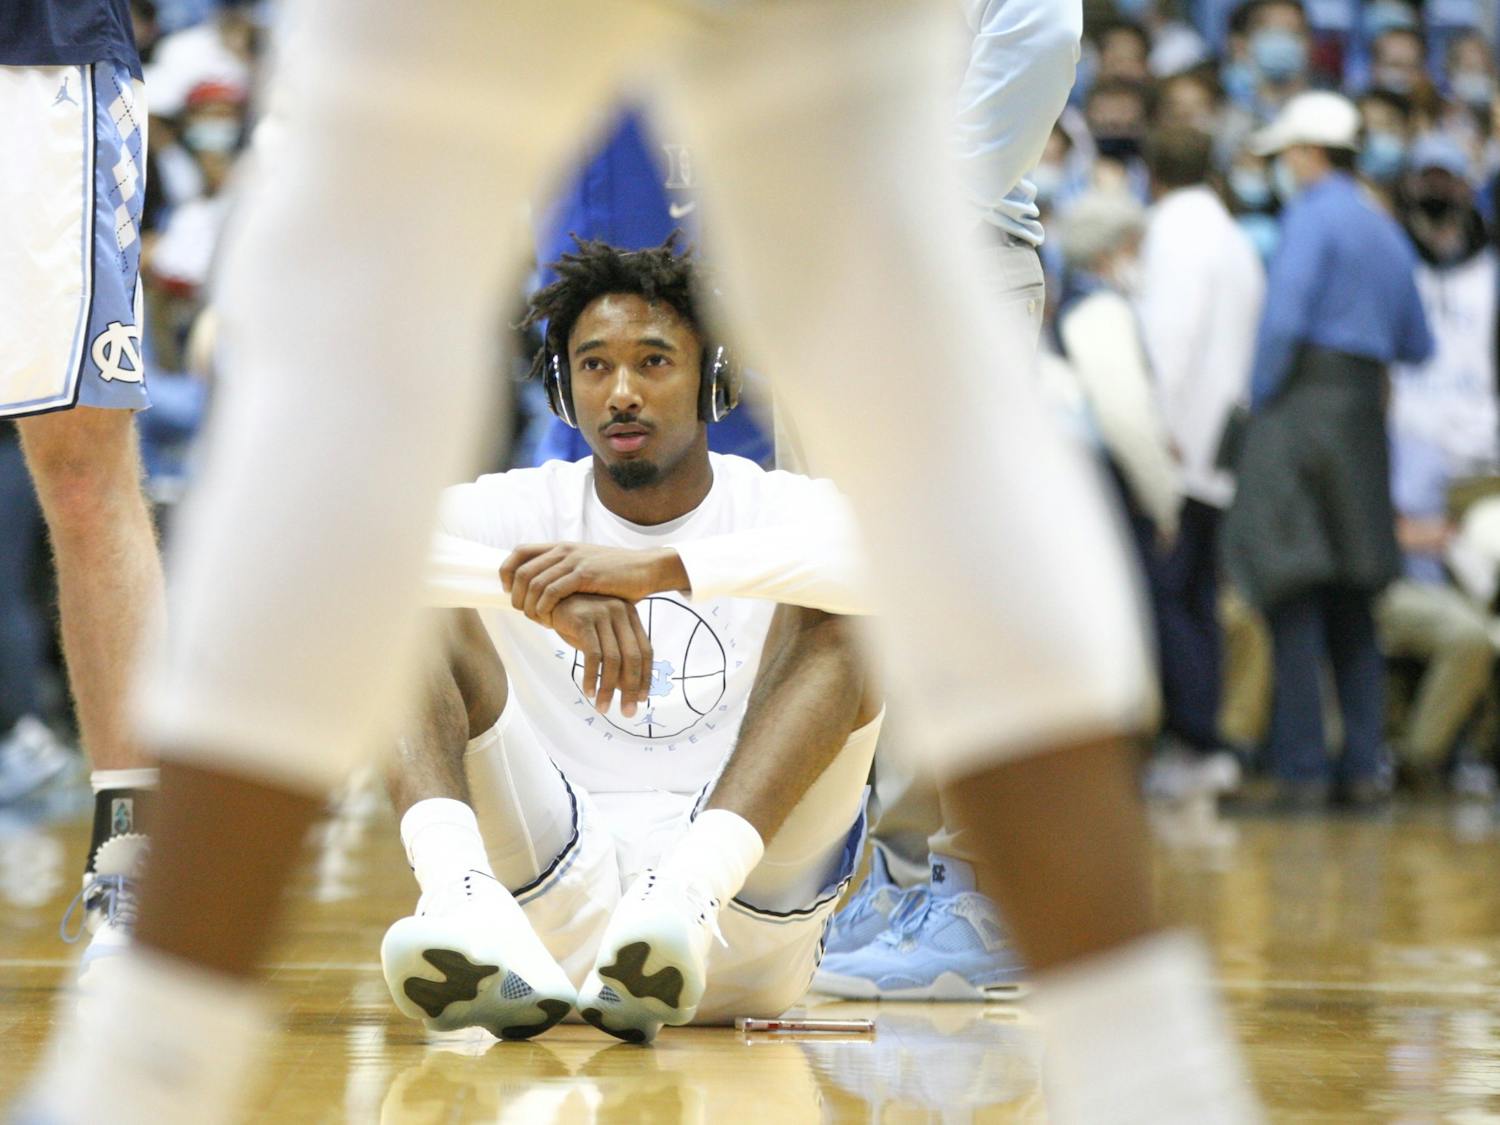 Senior forward Leaky Black prepares to warm up before a home UNC men's basketball game against Duke in the Dean Smith Center on Saturday, Feb. 5, 2022. Duke won 87-67.